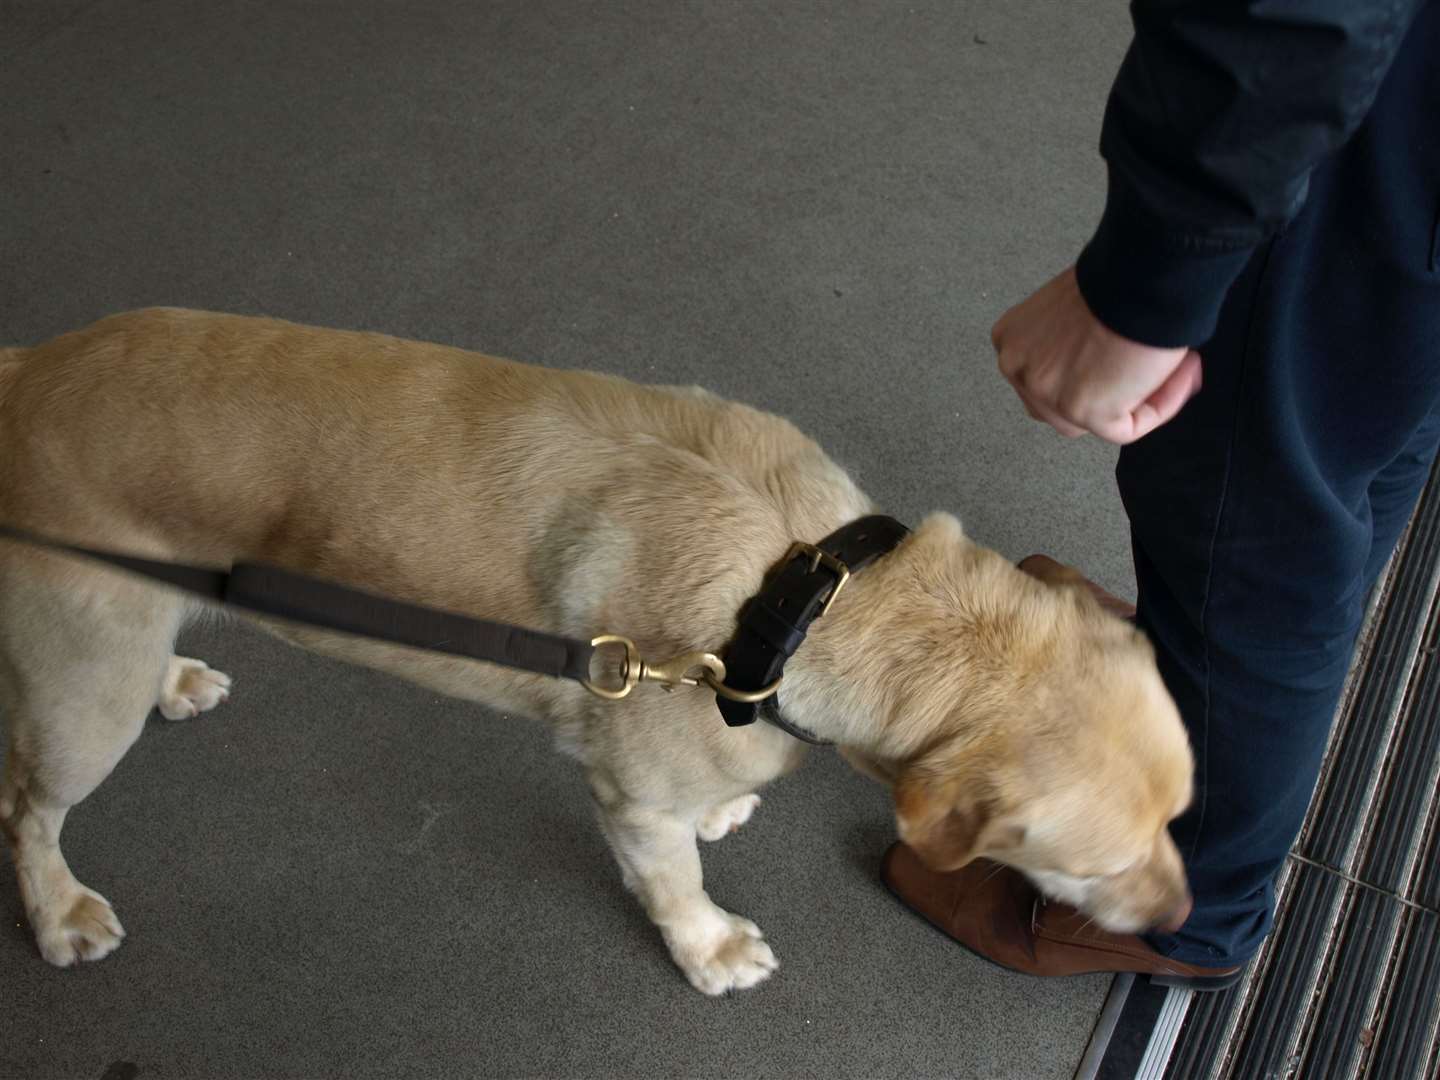 Police used sniffer dogs such as this one in the search